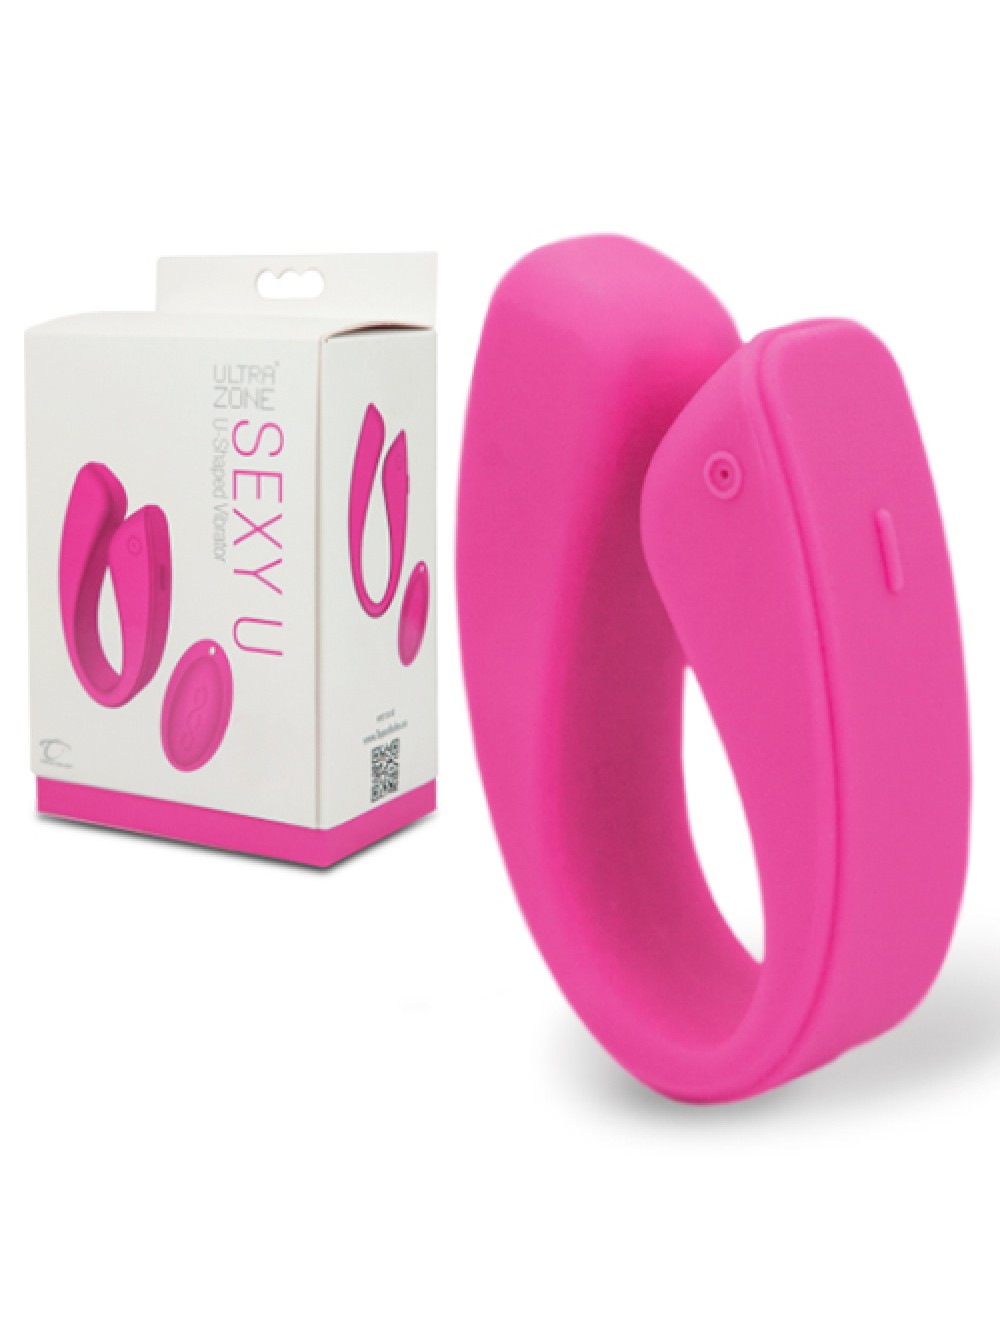 SEXY U RECHARGEABLE VIBRATOR PINK